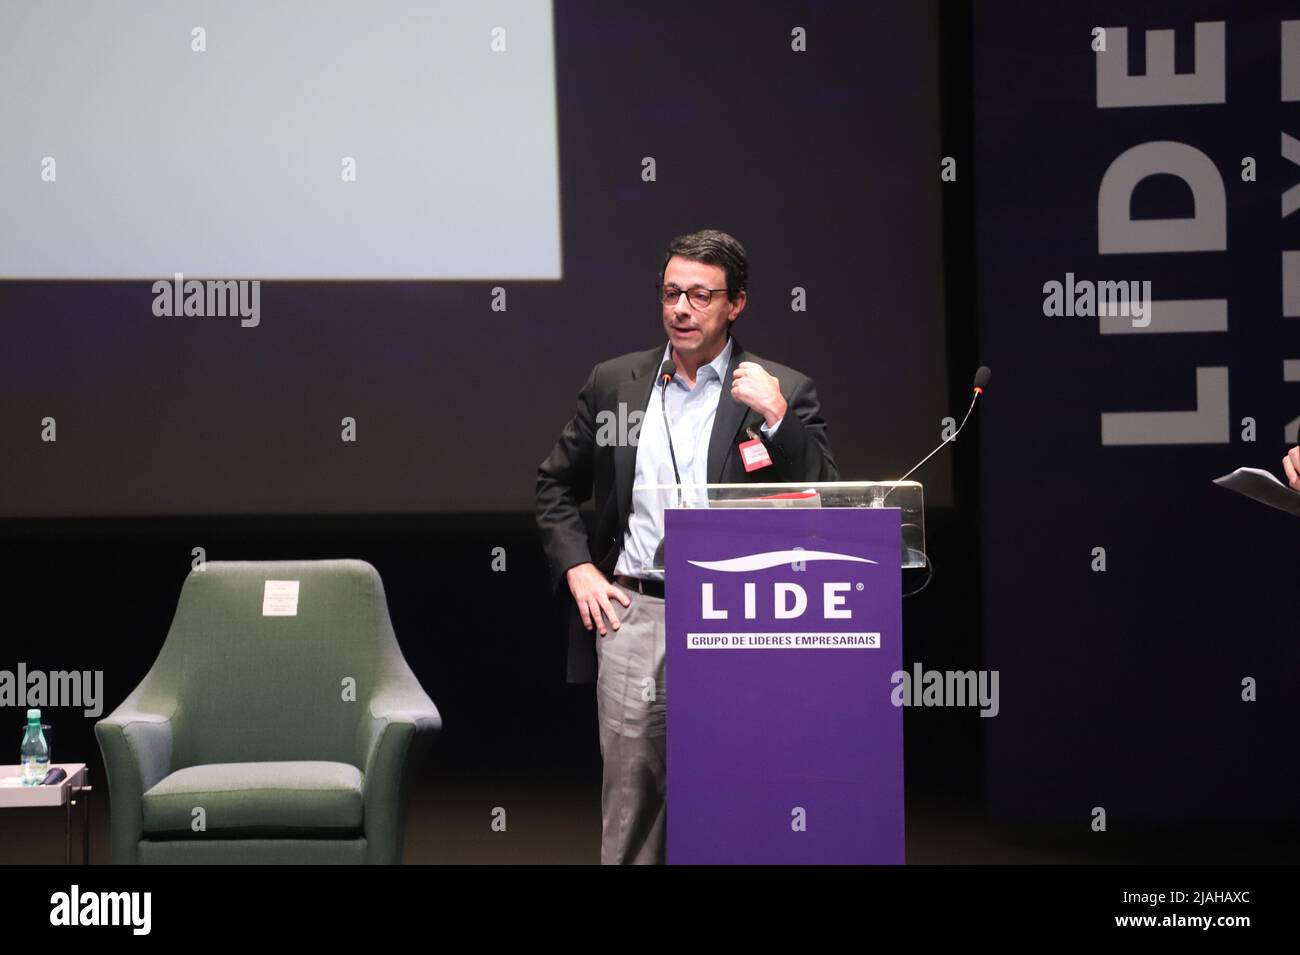 May 30, 2022, Sao Paulo, Sao Paulo, Brasil: (INT) Technology/Economy: Lide Next Economy 3.0 is held in Sao Paulo. May 30, 2022, Sao Paulo, Brazil: Lide Next Economy 3.0 event, held at Theater B32, in Sao Paulo, on Monday (30). The debate on the importance of technology has the participation of the main executives of the segment in Brazil. Denis Nakazawa, director of financial services at Accenture, CEO of Xtage XP, Marcos Horie, Daniel Mangabeira, director of Institutional Relations at Binance for Latin America, Accenture president Leonardo Framil, Joao Manoel Pinho de Mello, teacher at Insper Stock Photo